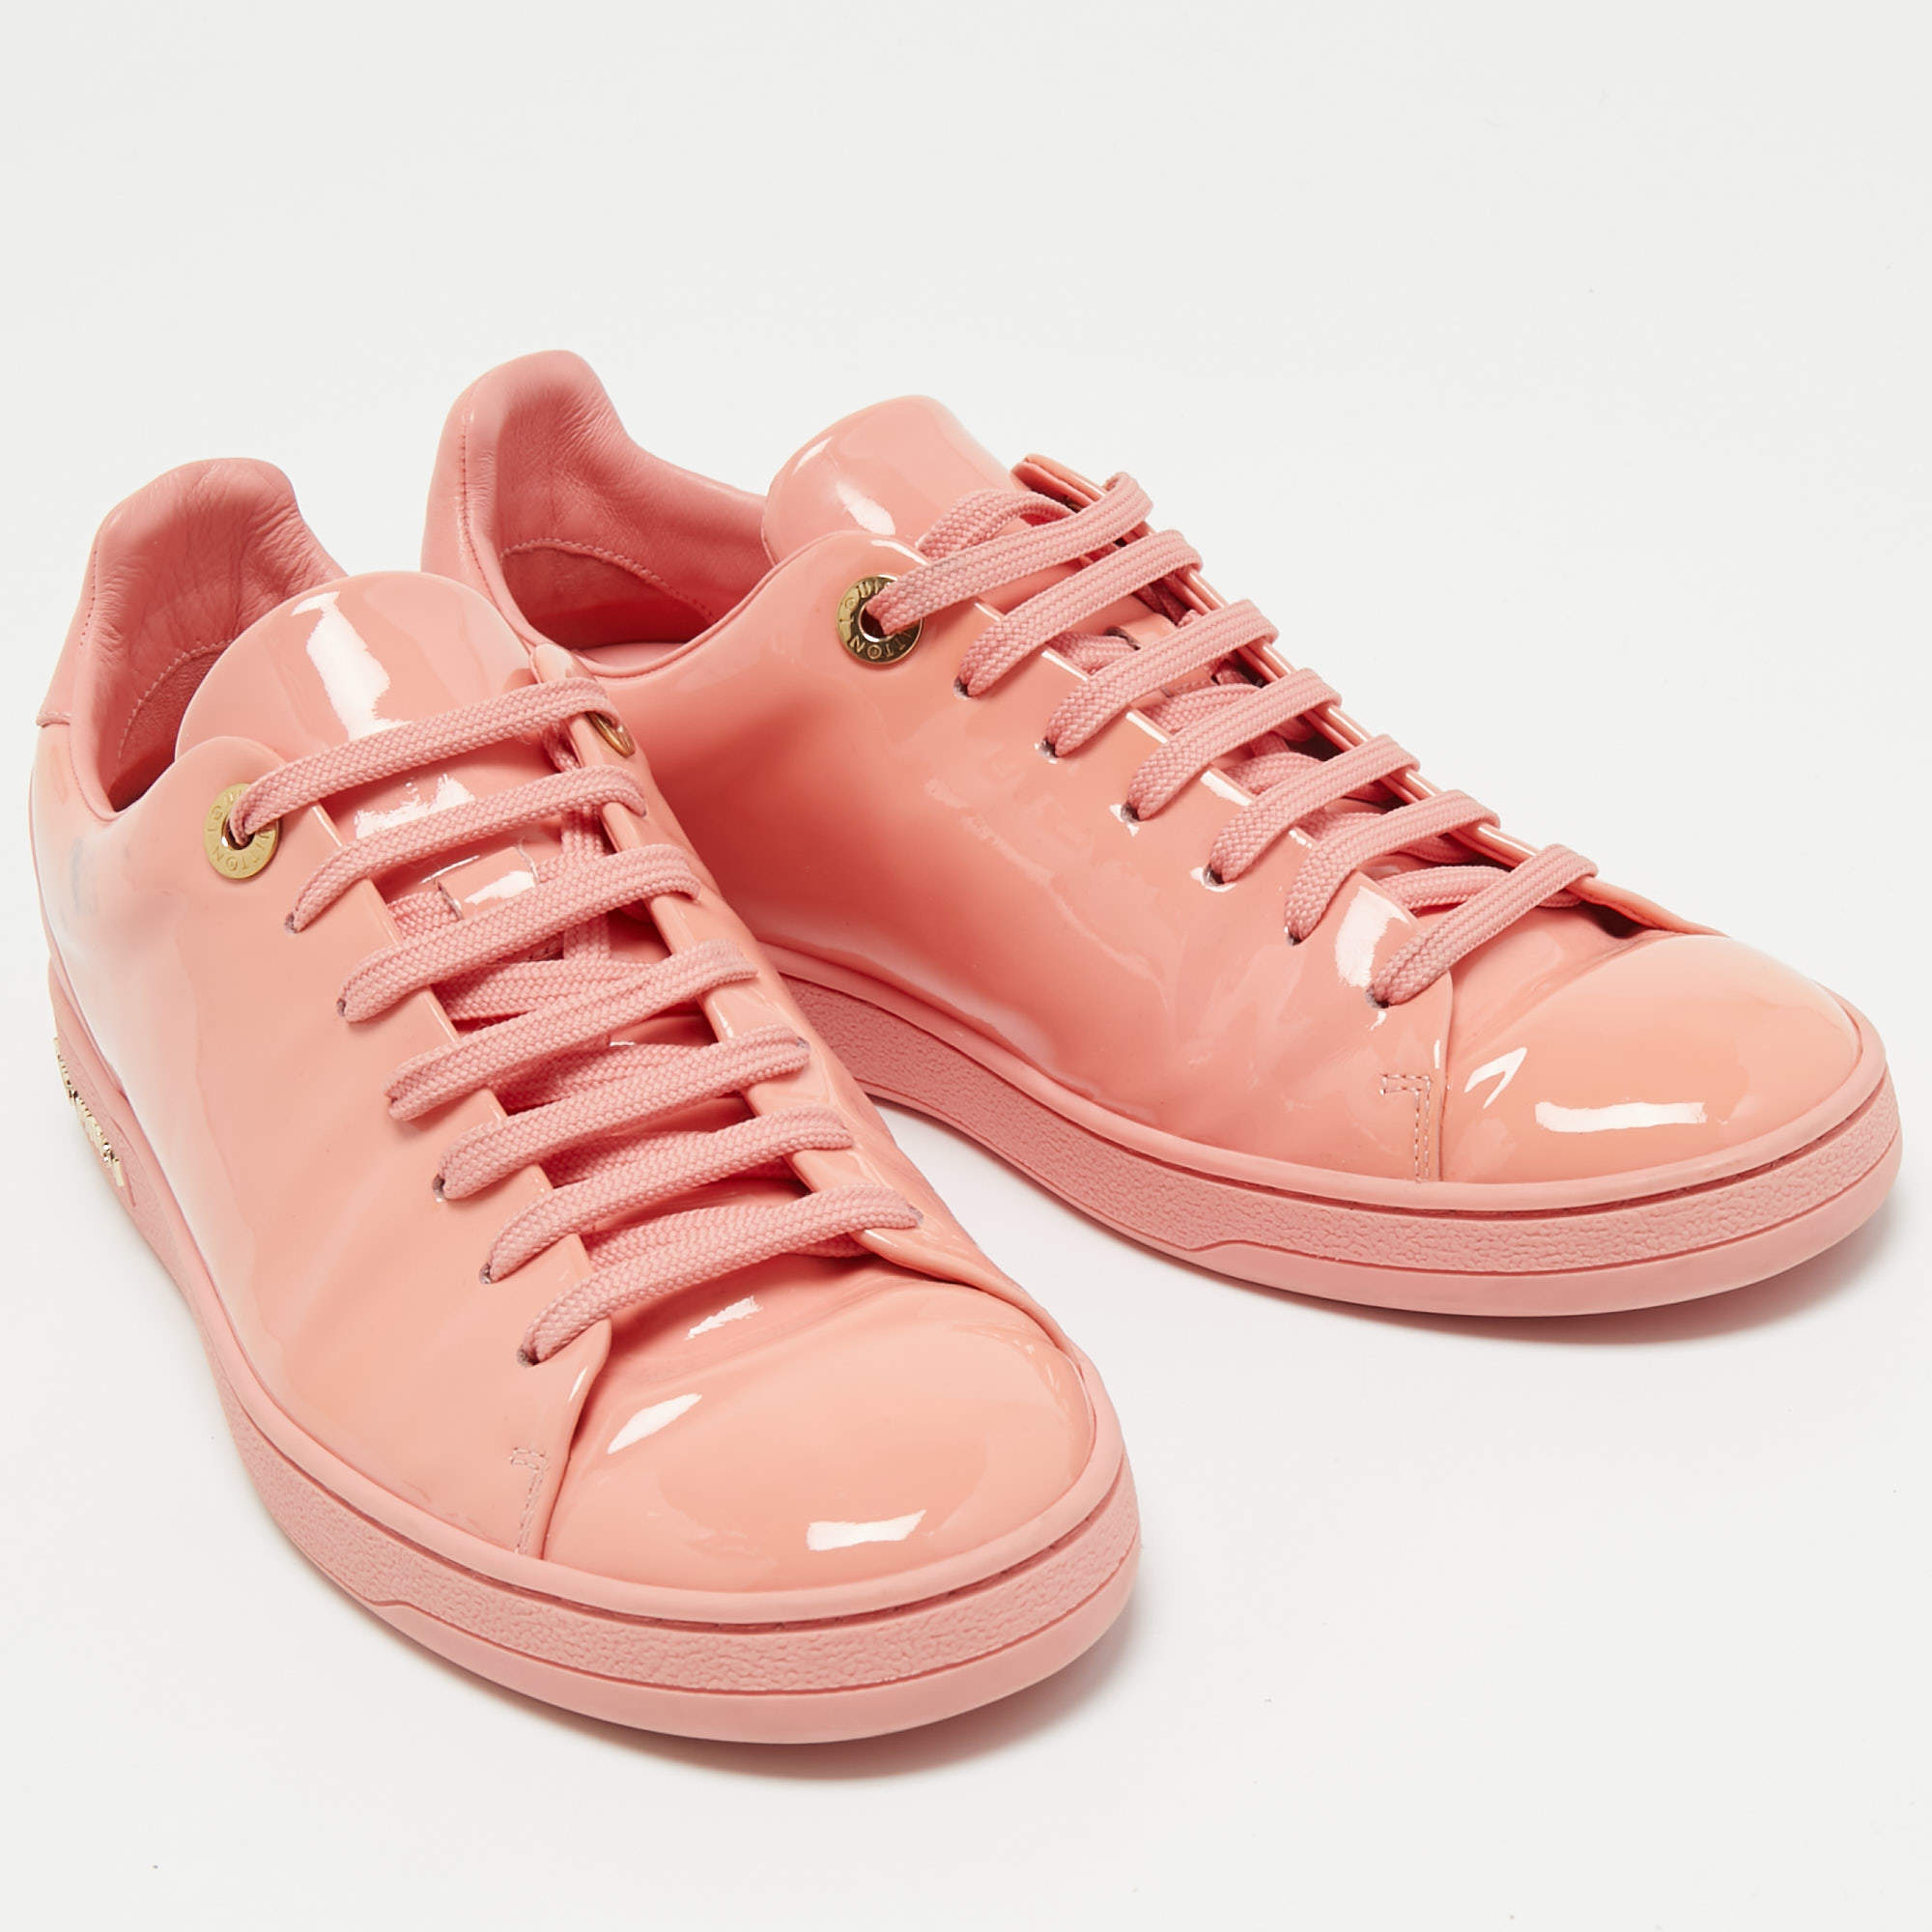 Louis Vuitton, Shoes, Authentic Louis Vuitton Soft Pink Leather Wing Tip  Flat Sneakers Size 377